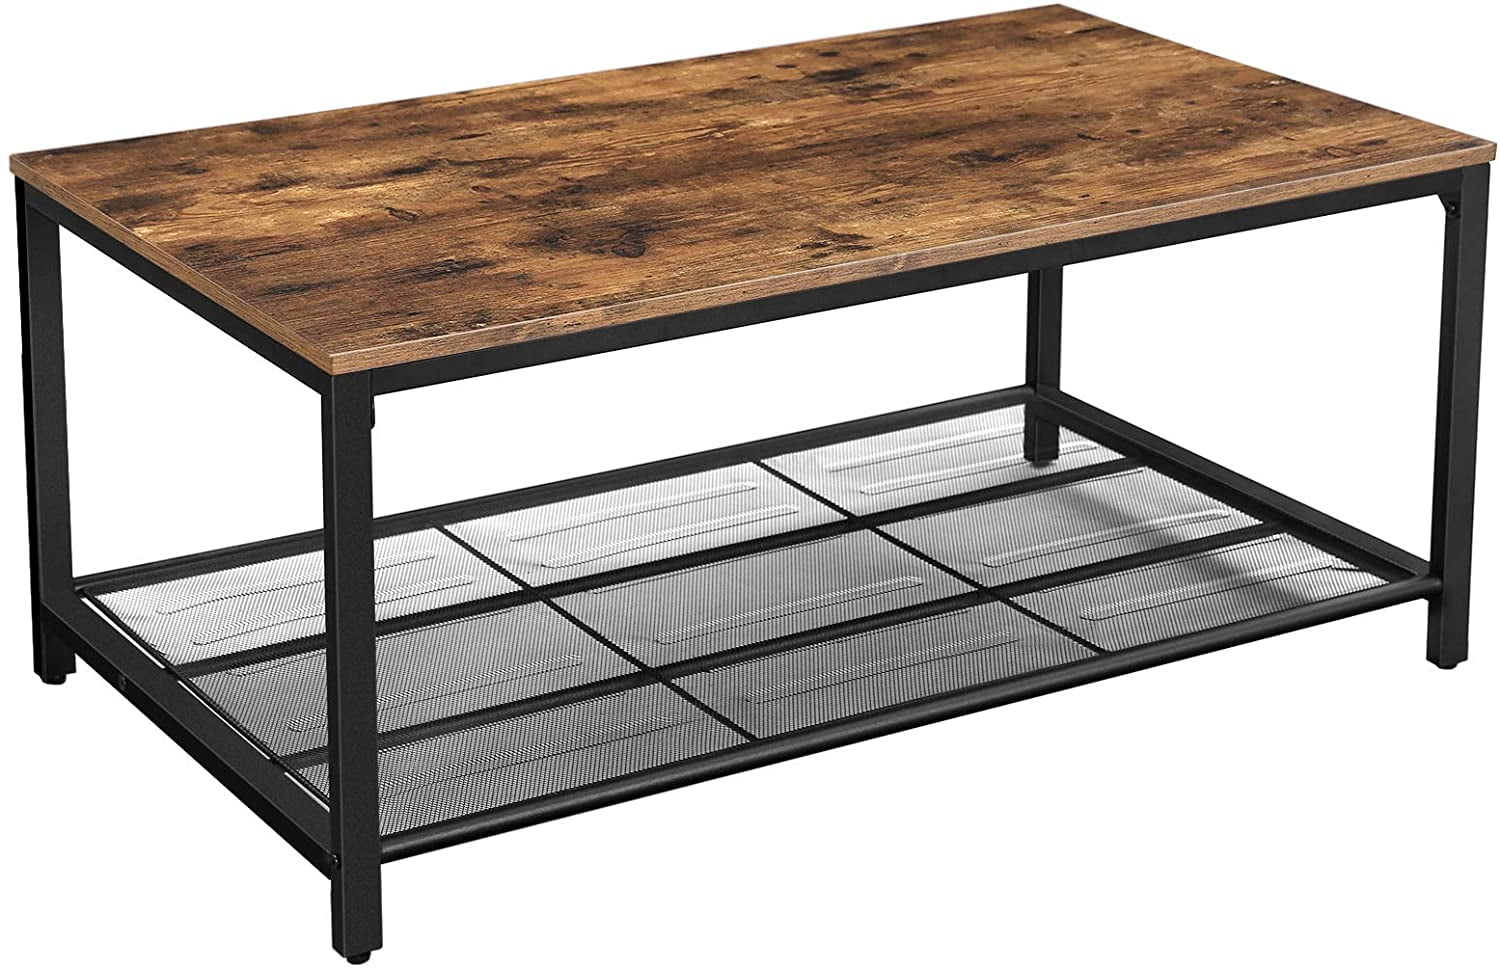 VASAGLE Coffee Table Rustic Brown ULCT028X01 for Living Room Cocktail Table with Drawer and Open Storage Compartment Long Legs 39.4 x 19.7 x 17.7 Inches 